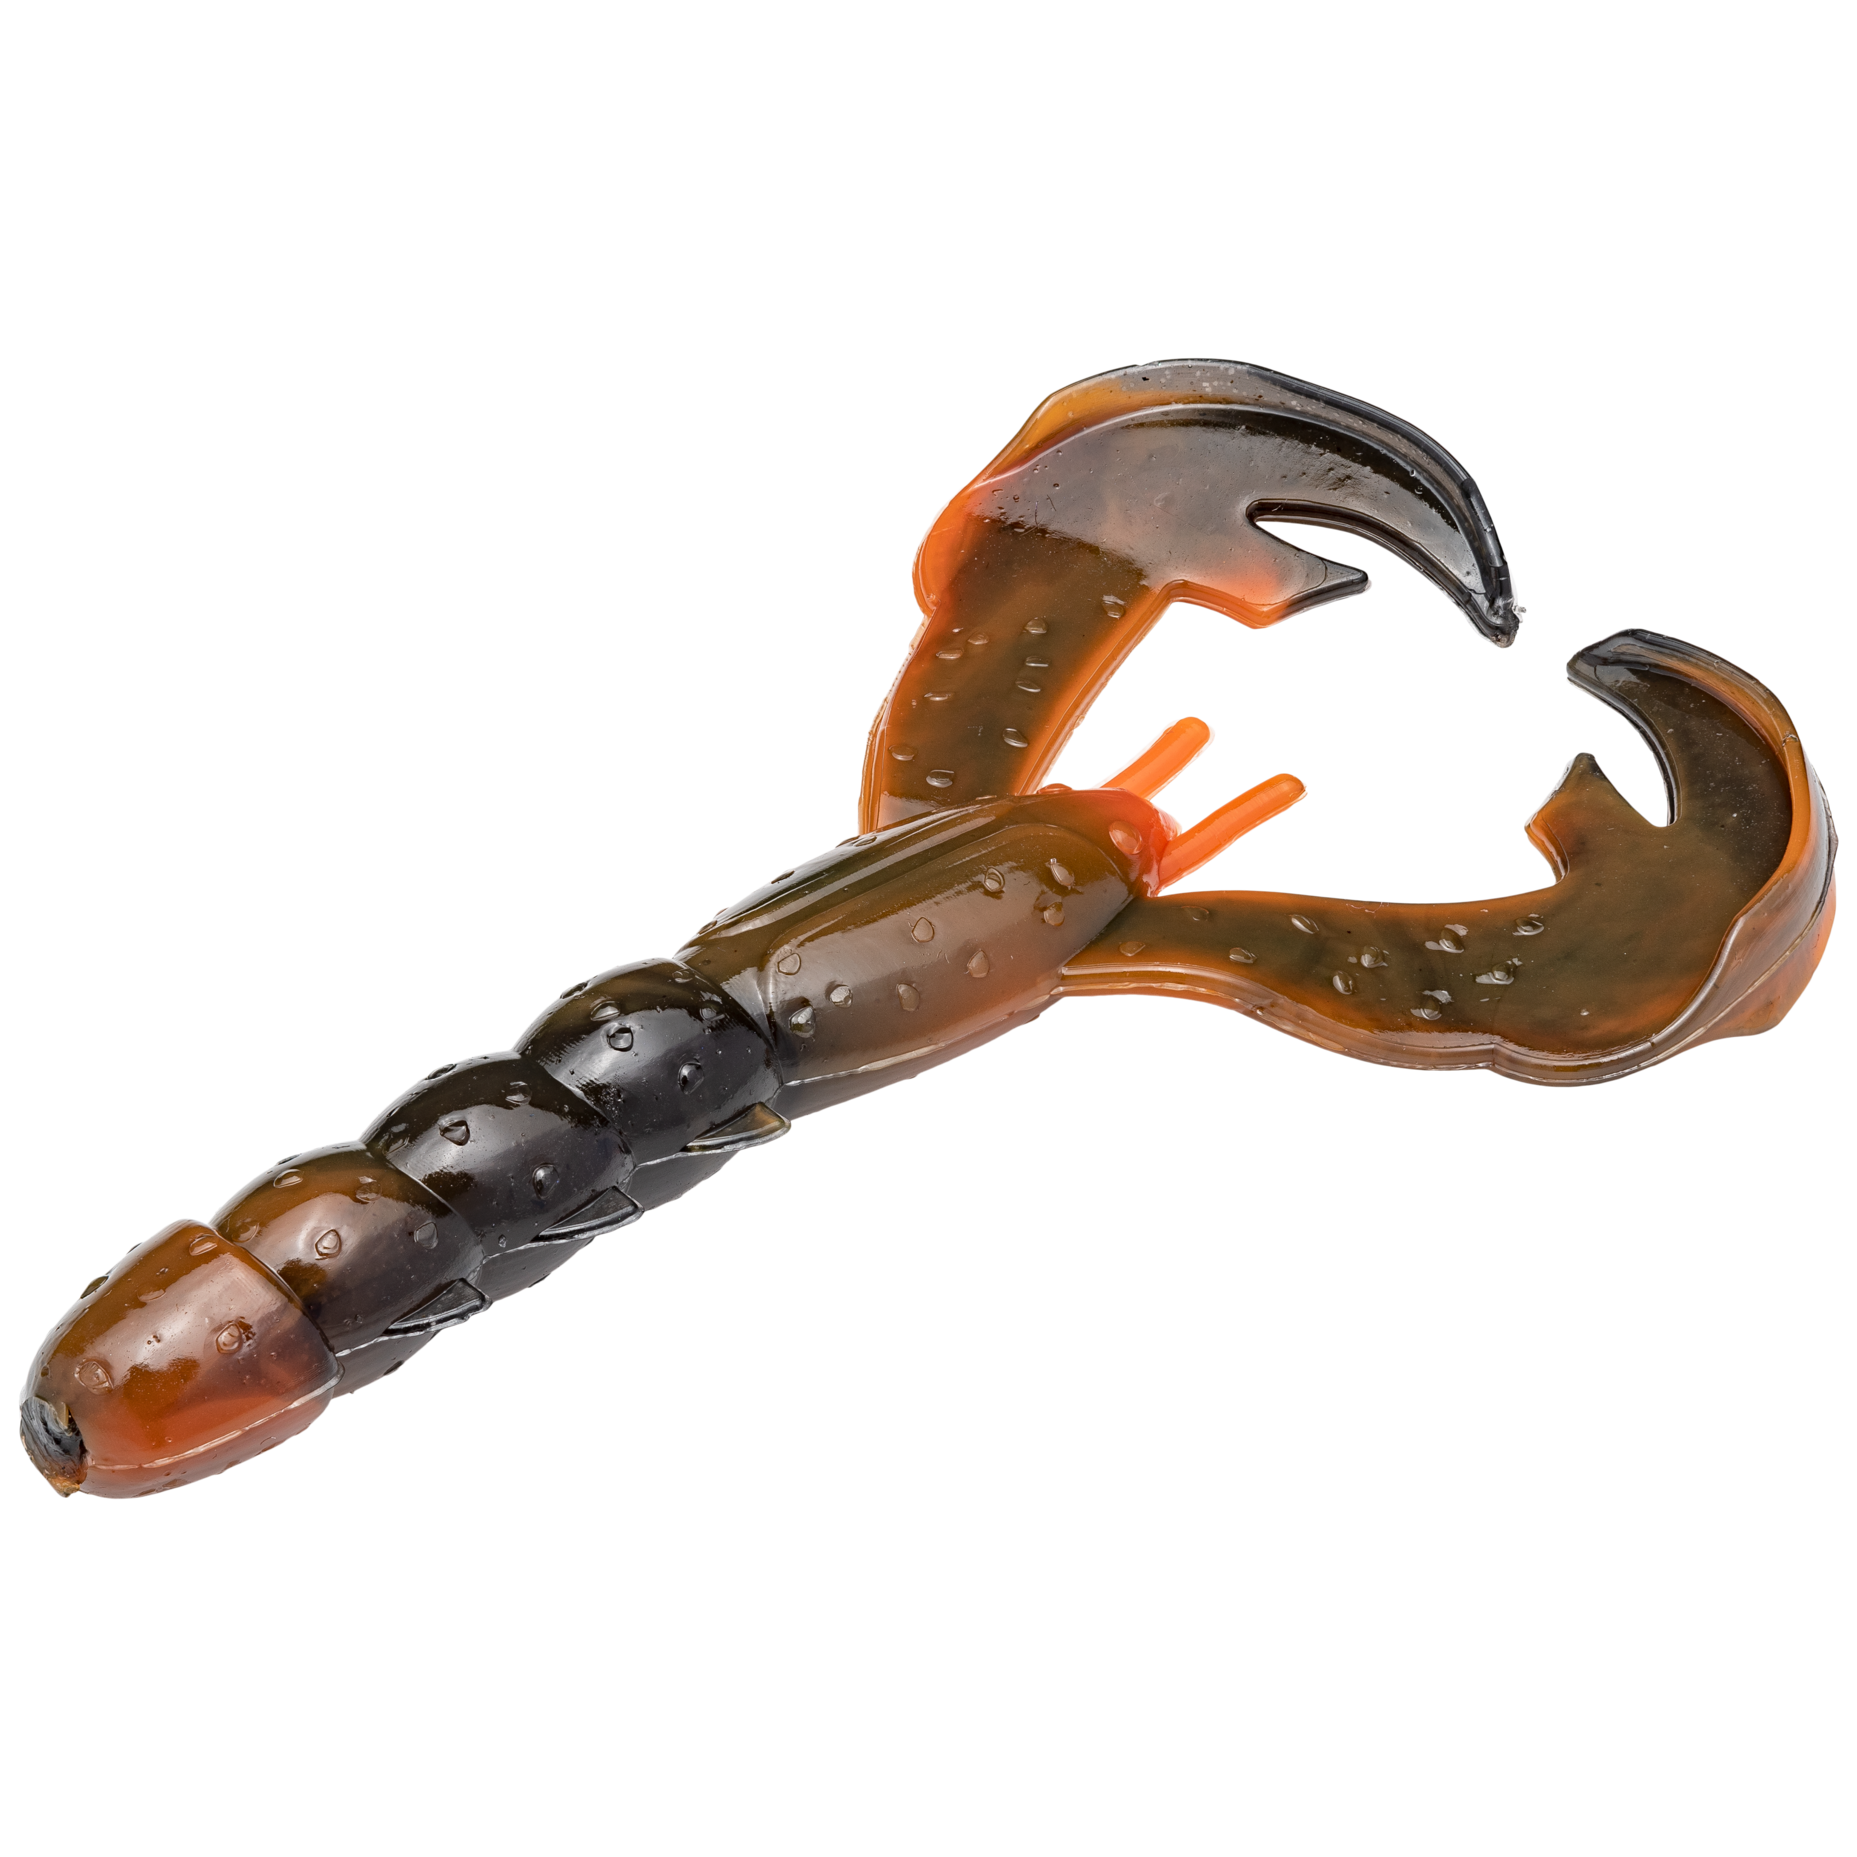 Strike King Rage Tail ReCon Worm - Angler's Headquarters